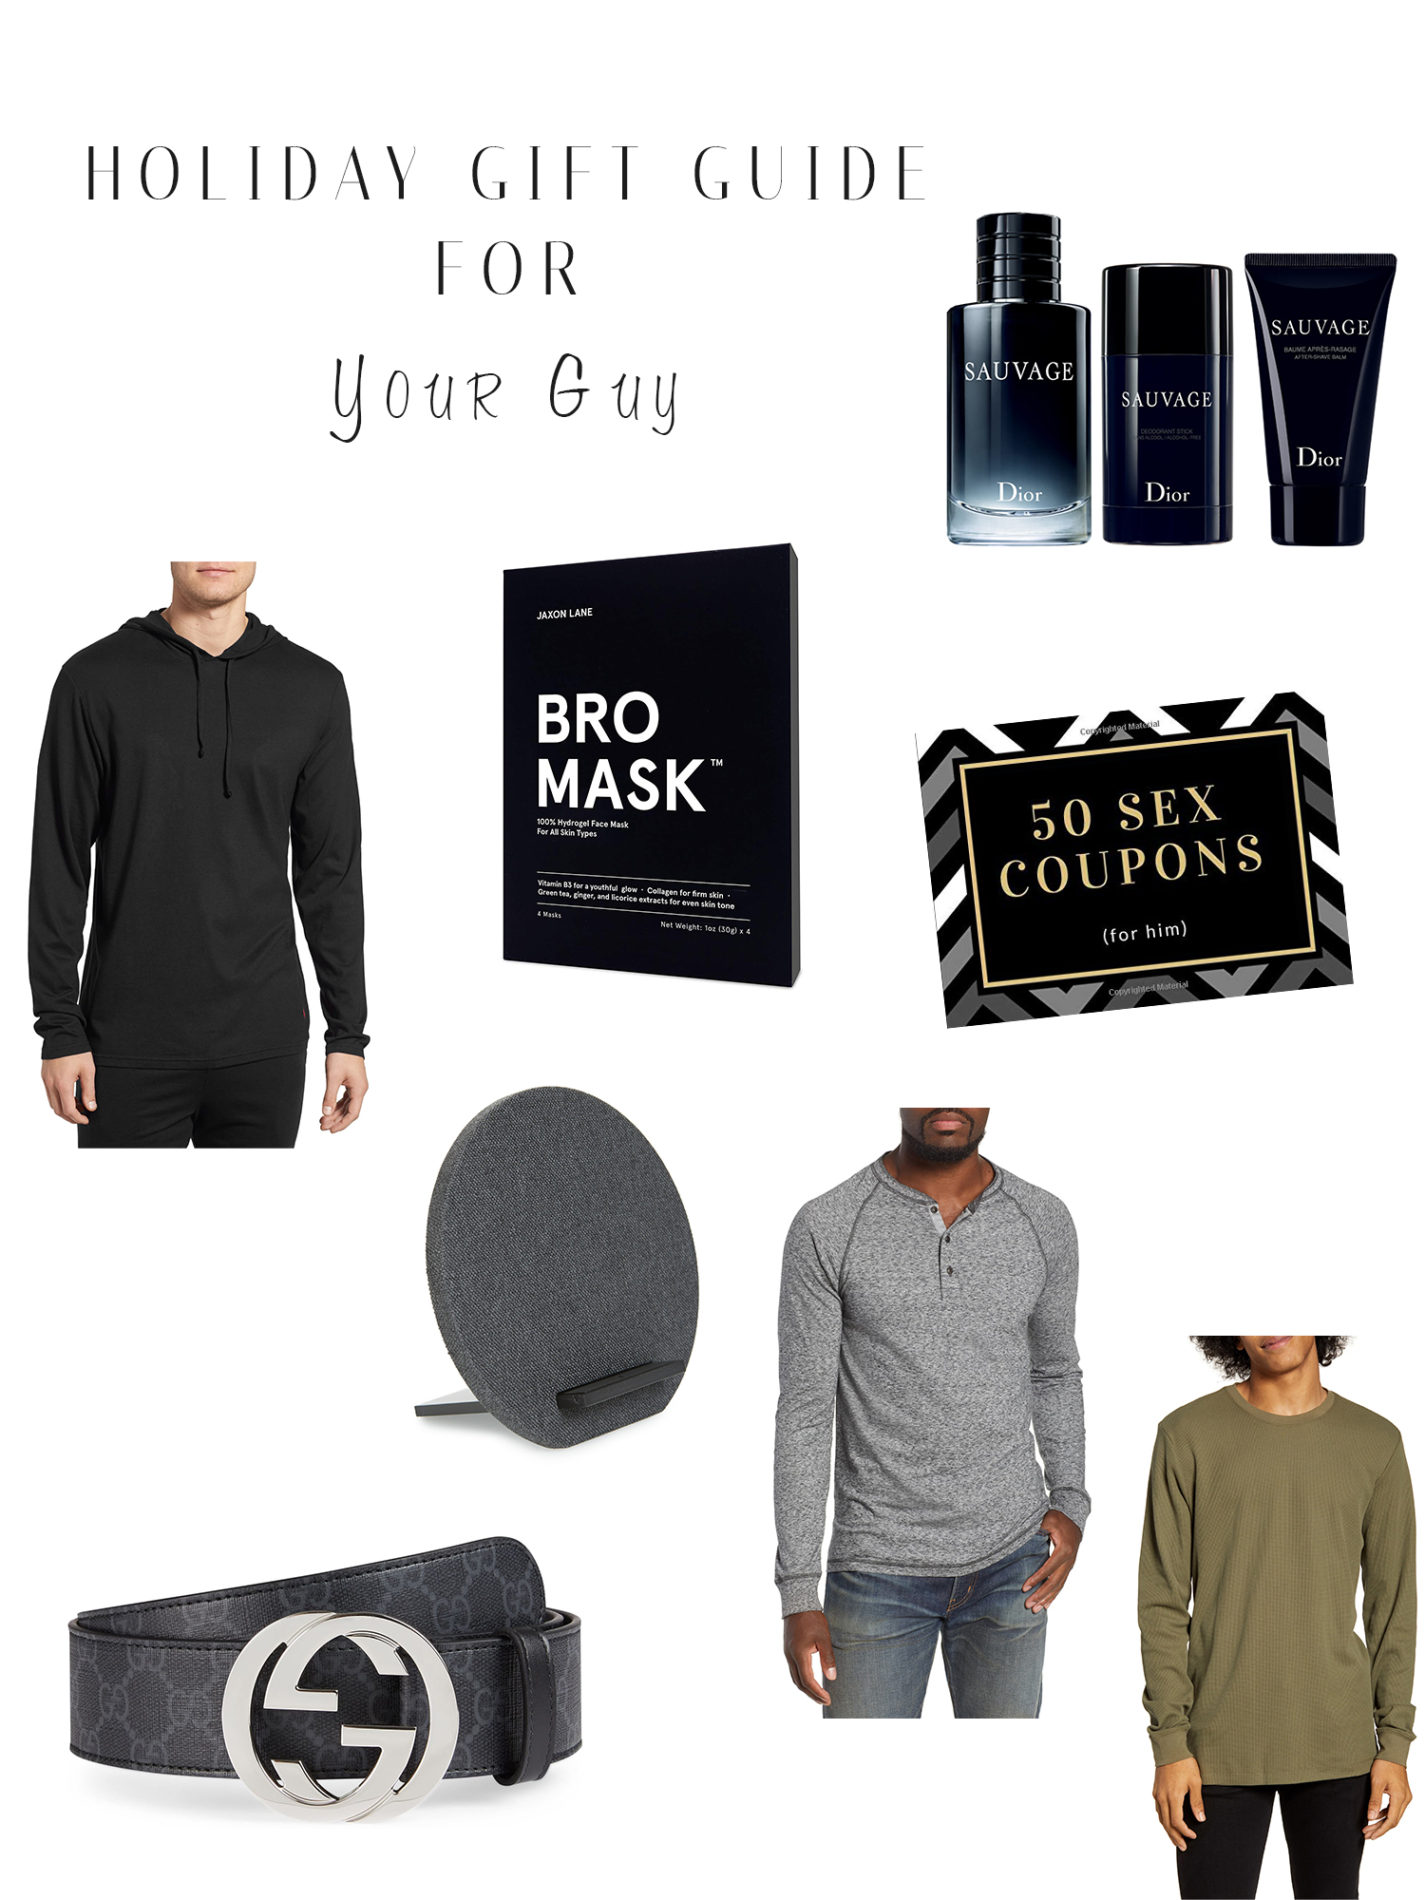 Gift Guide for Your Co-Workers | Christmas gifts | Holiday gift guide | Blondie in the City by Hayley Larue